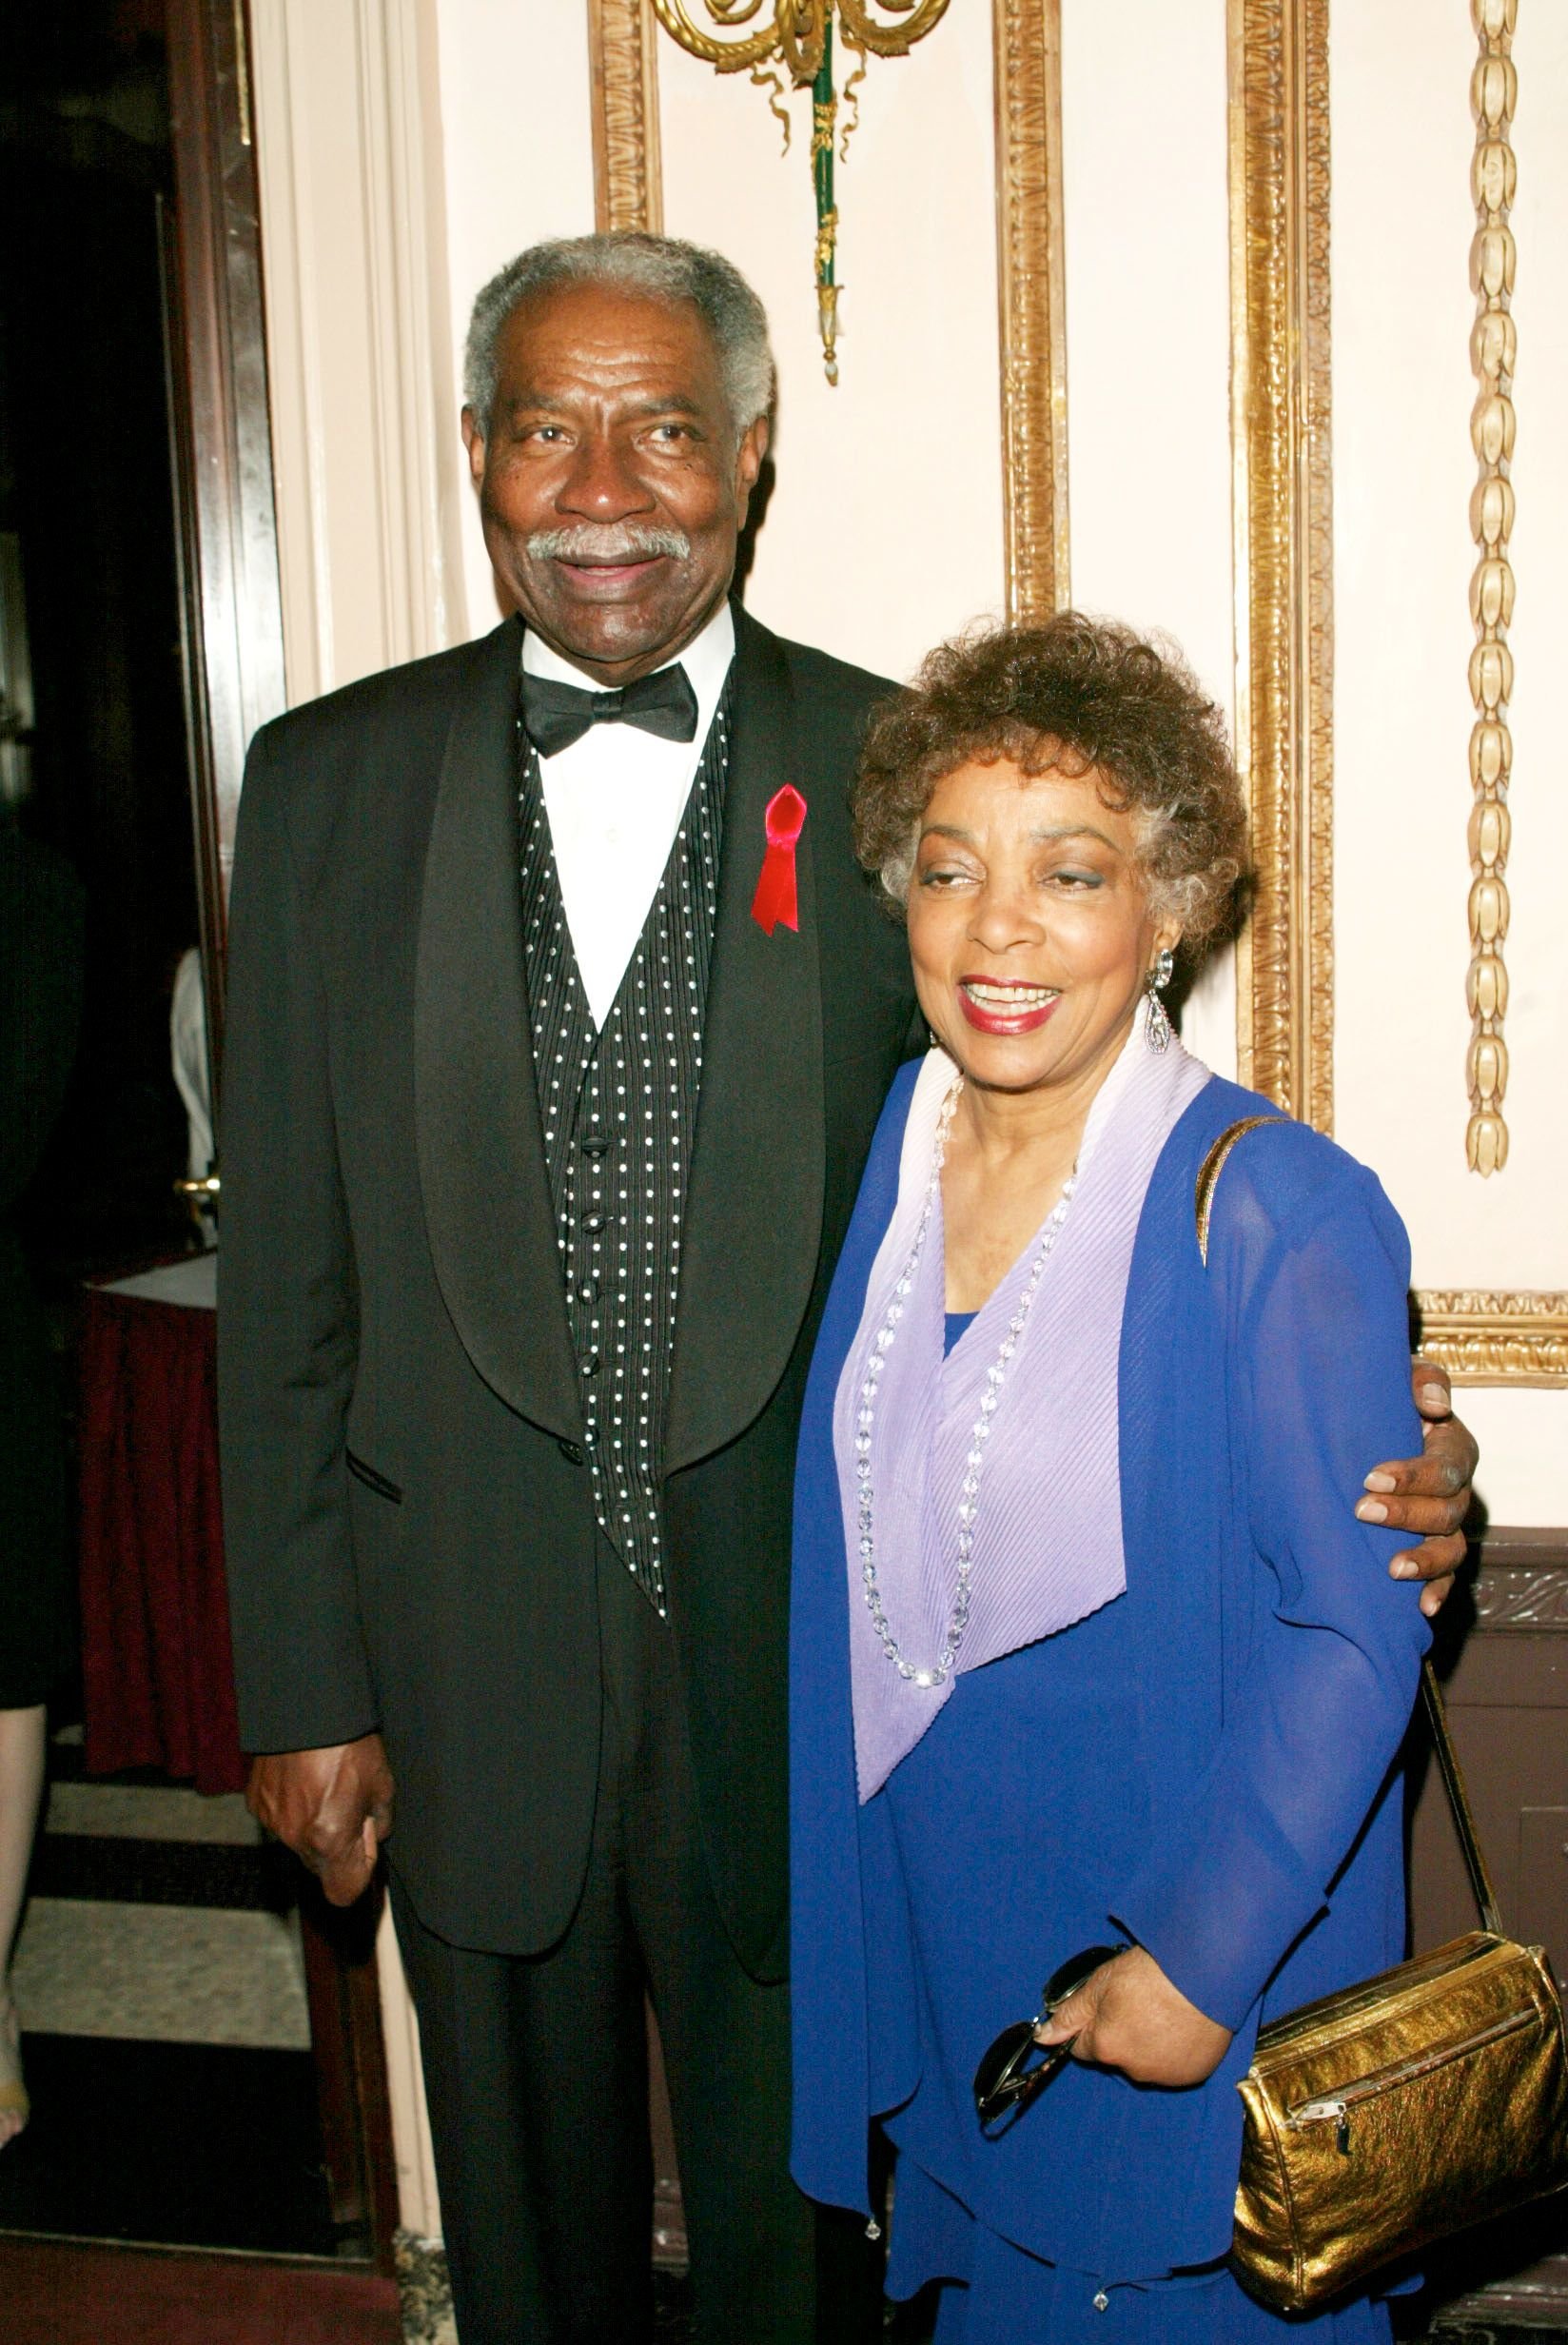 Ossie Davis and Ruby Dee at the 3rd Annual Directors Guild Of America Honors at the Waldorf-Astoria in New York City on June 9, 2002 | Photo: Getty Images